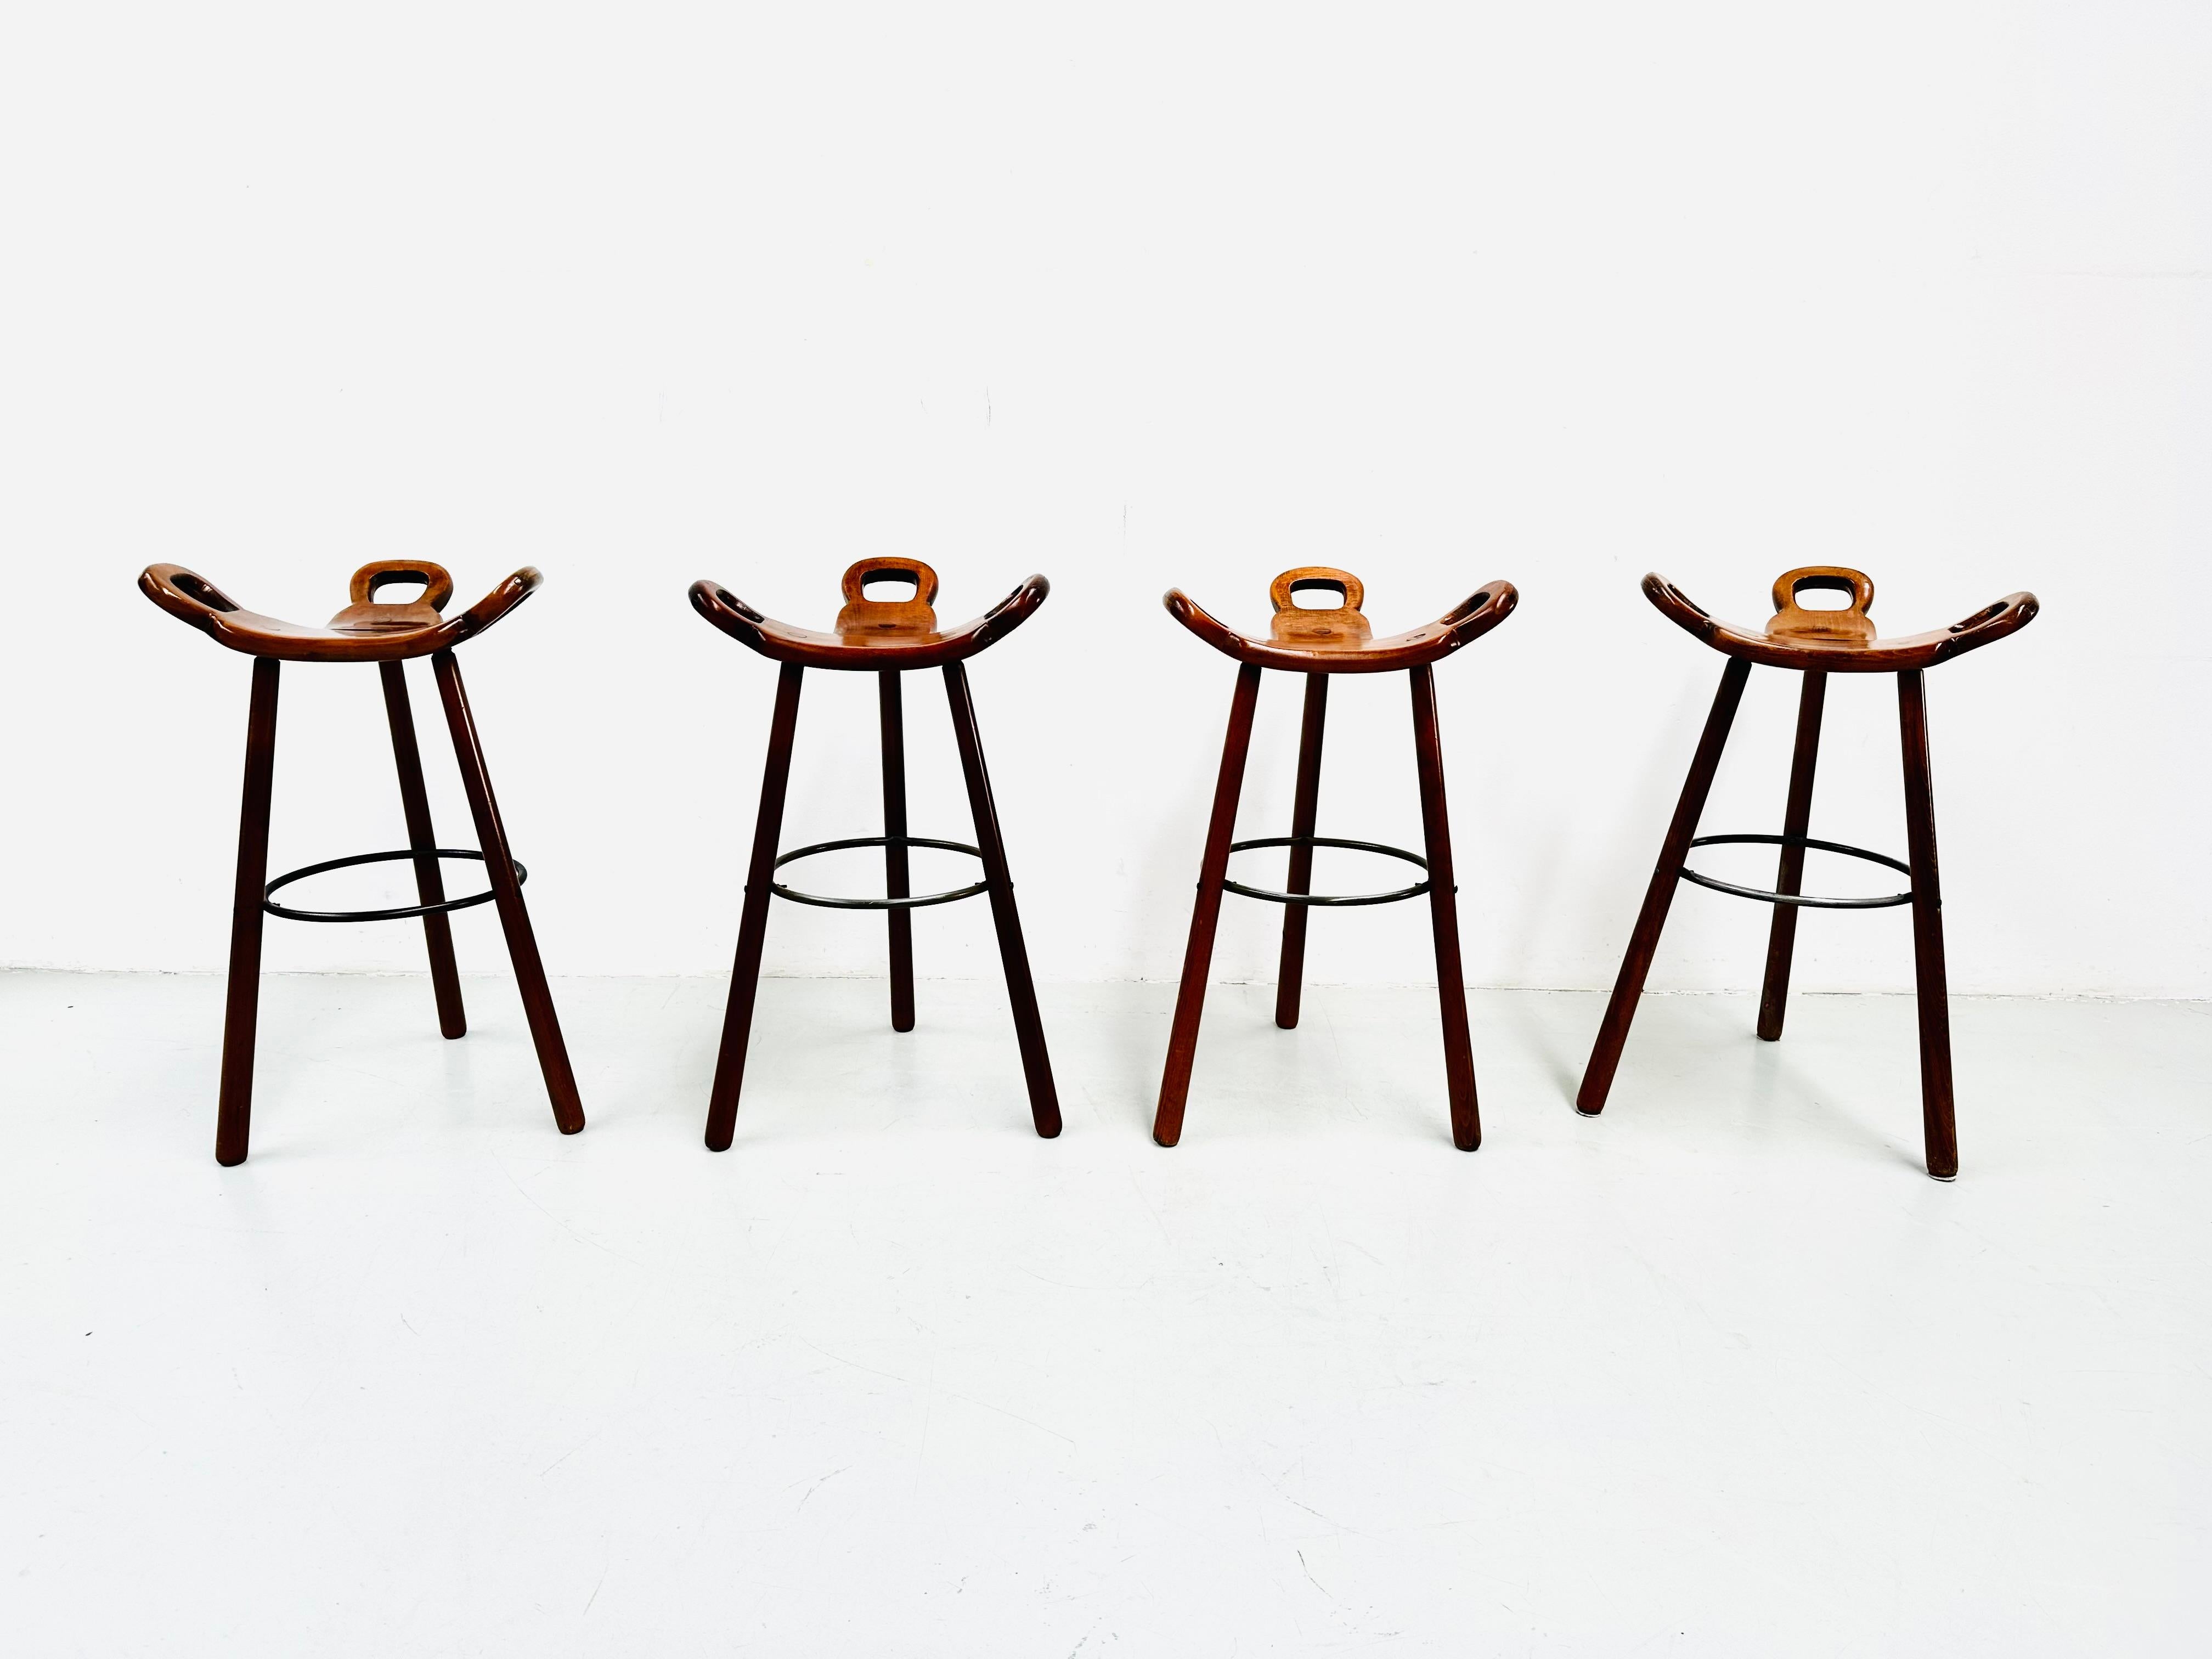 Late 20th Century Set of 4 Marbella Brutalist Stools by Sergio Rodrigues for Confonorm 1970s.